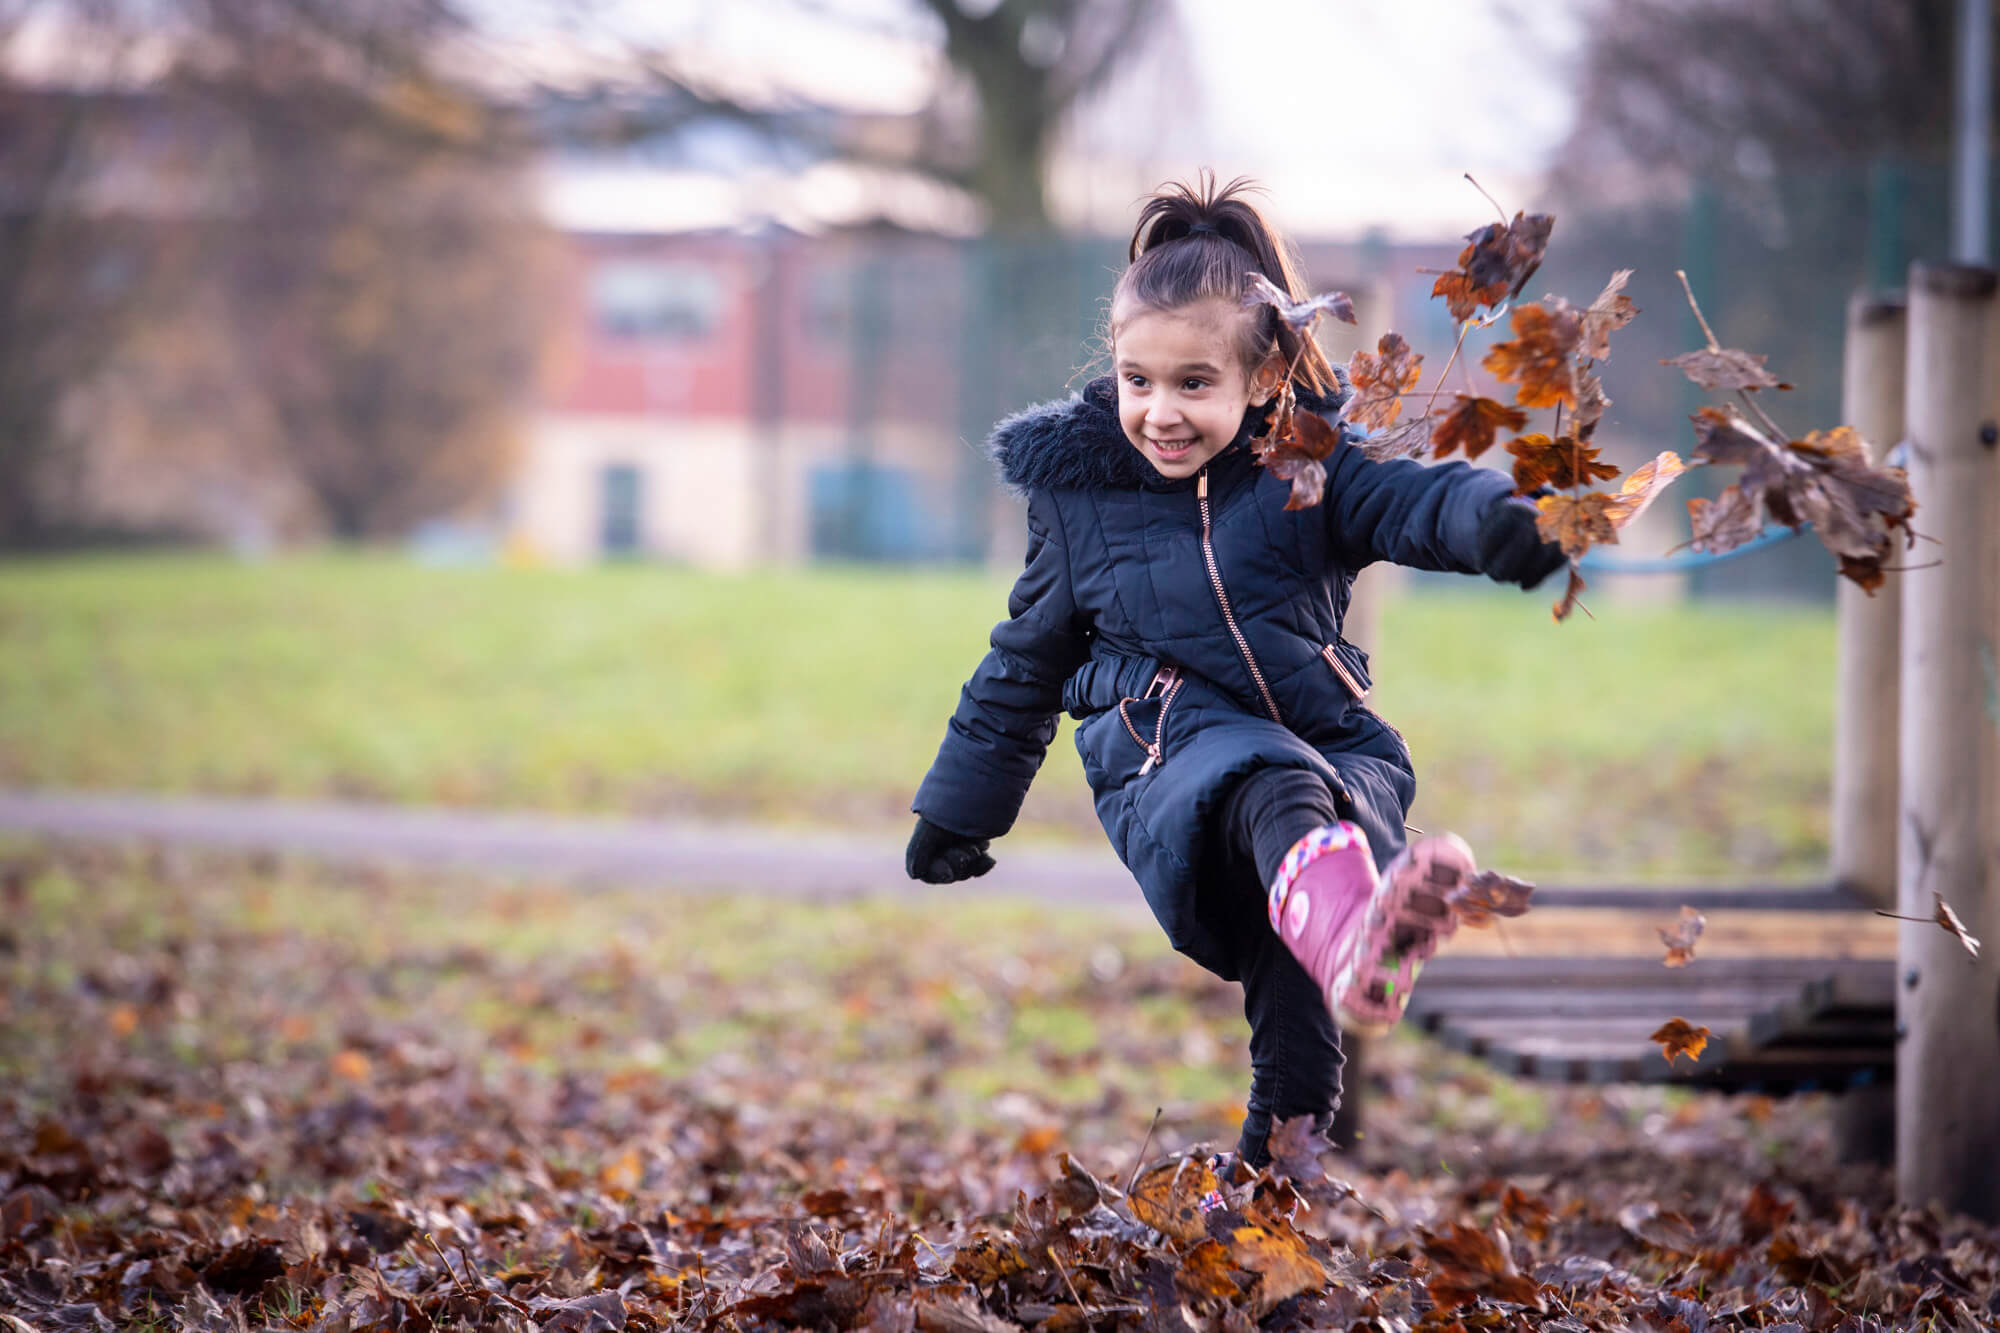 Photograph of a child in wellies kicking leaves